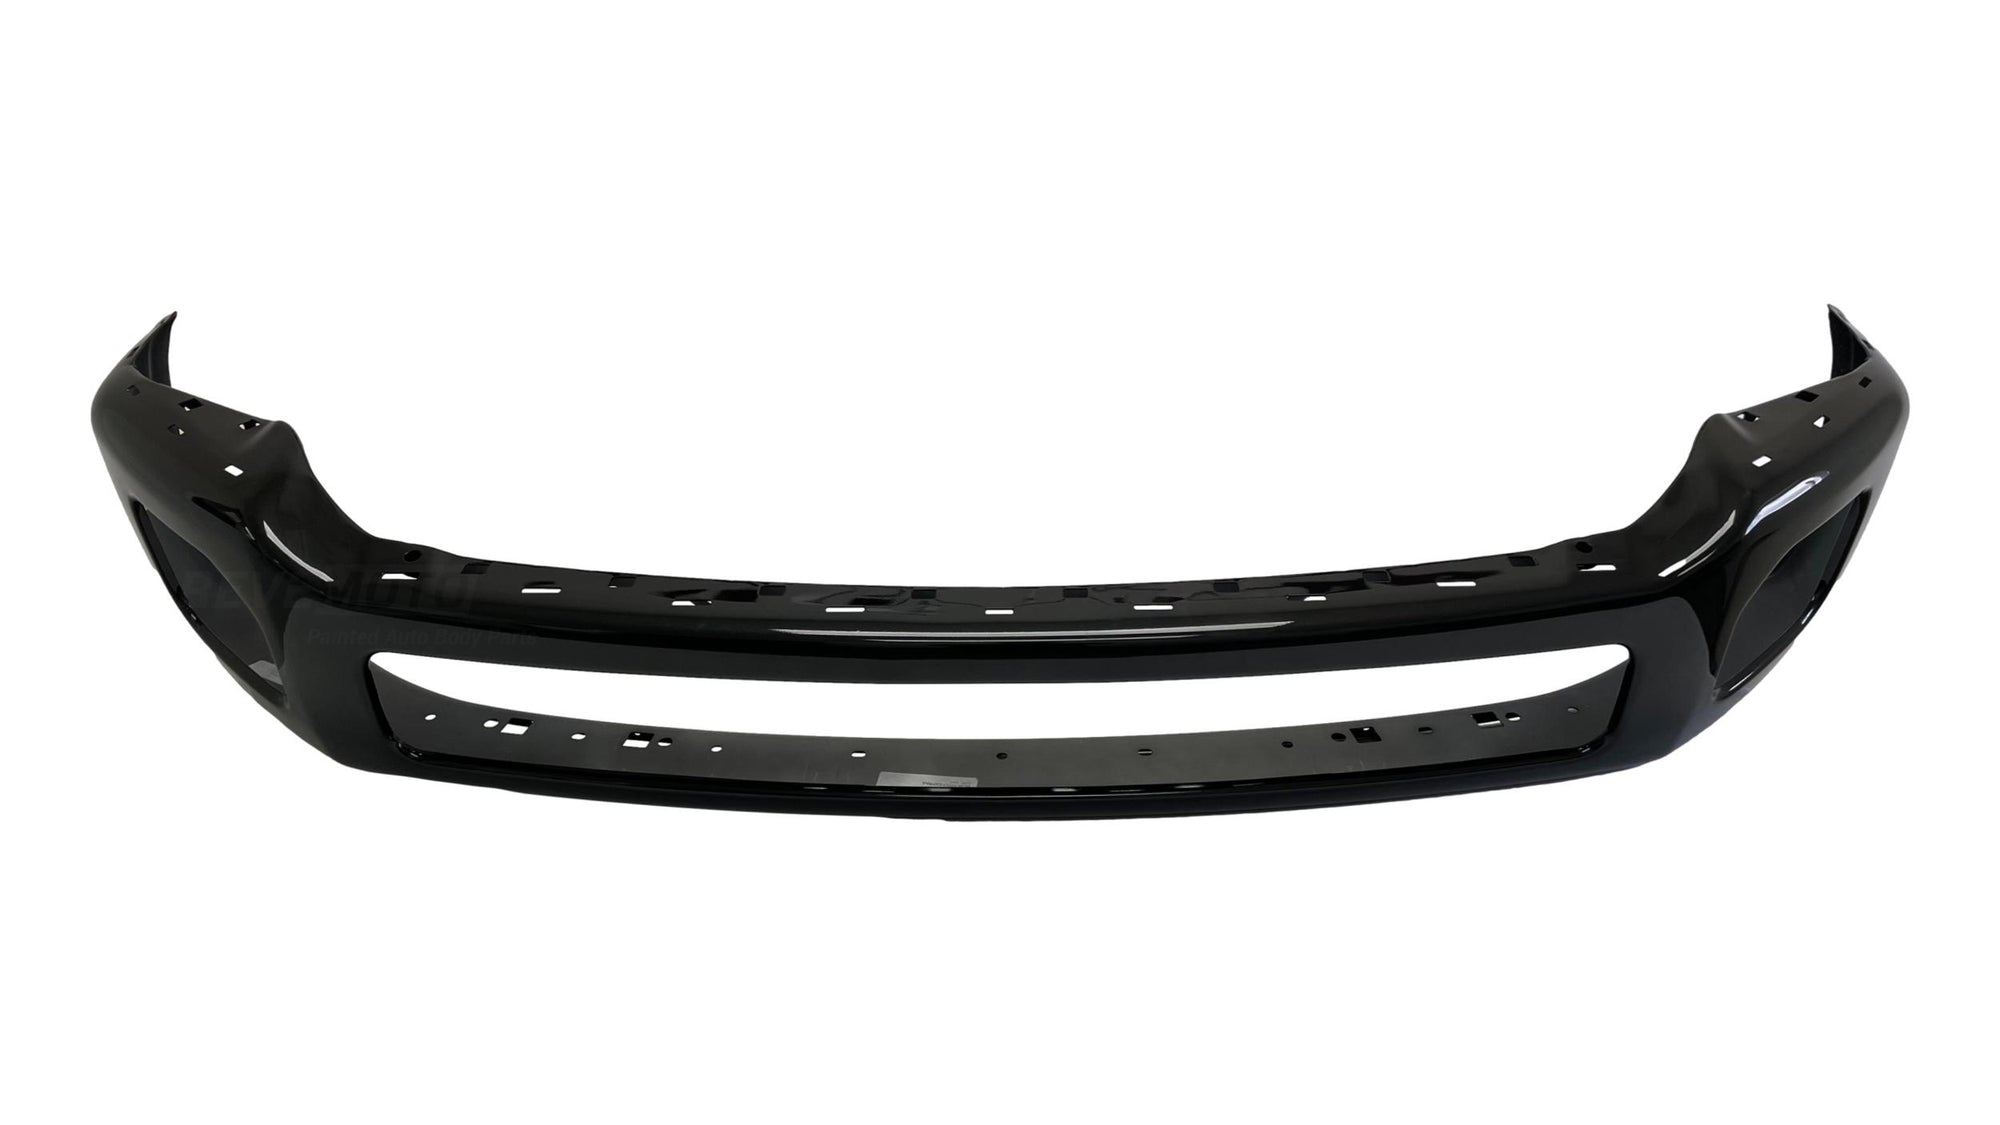 24841 - 2011-2016 Ford F450 Front Bumper Painted (Face Bar) Tuxedo Black Metallic (UH) BC3Z17757CPTM FO1002417